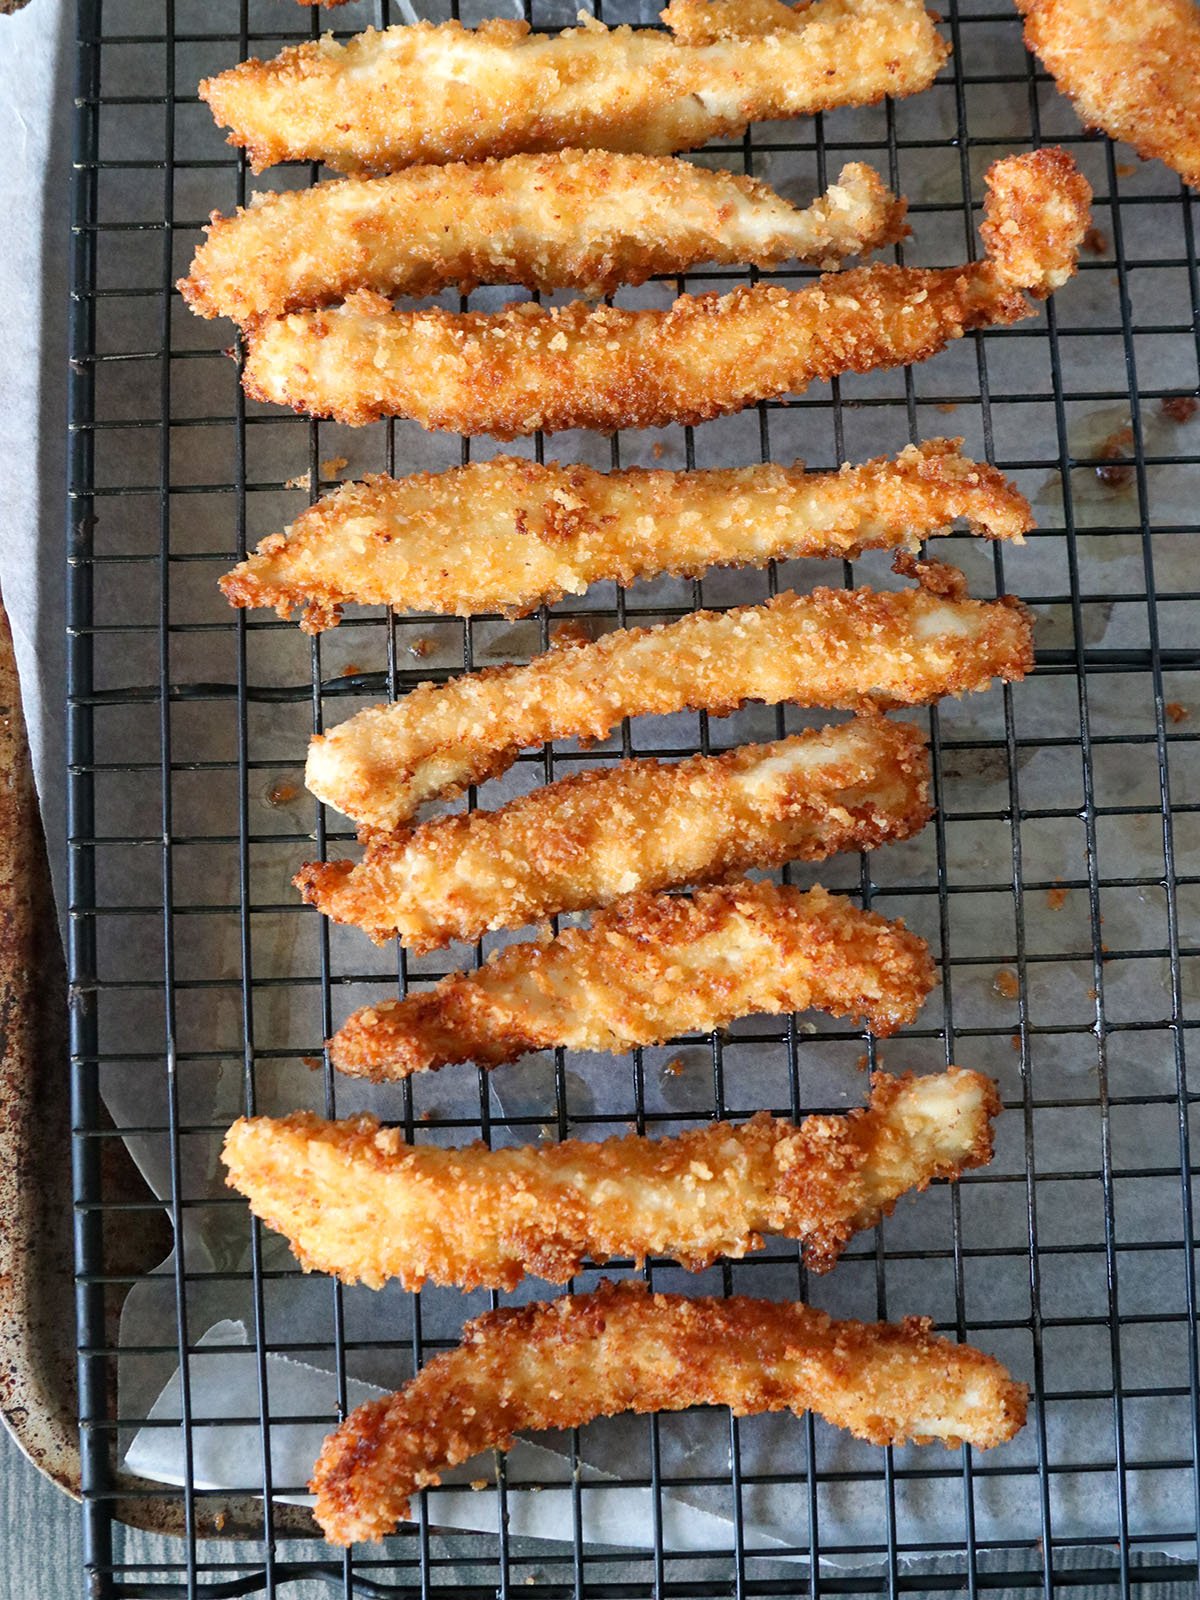 fried breaded chicken fries on a wire rack